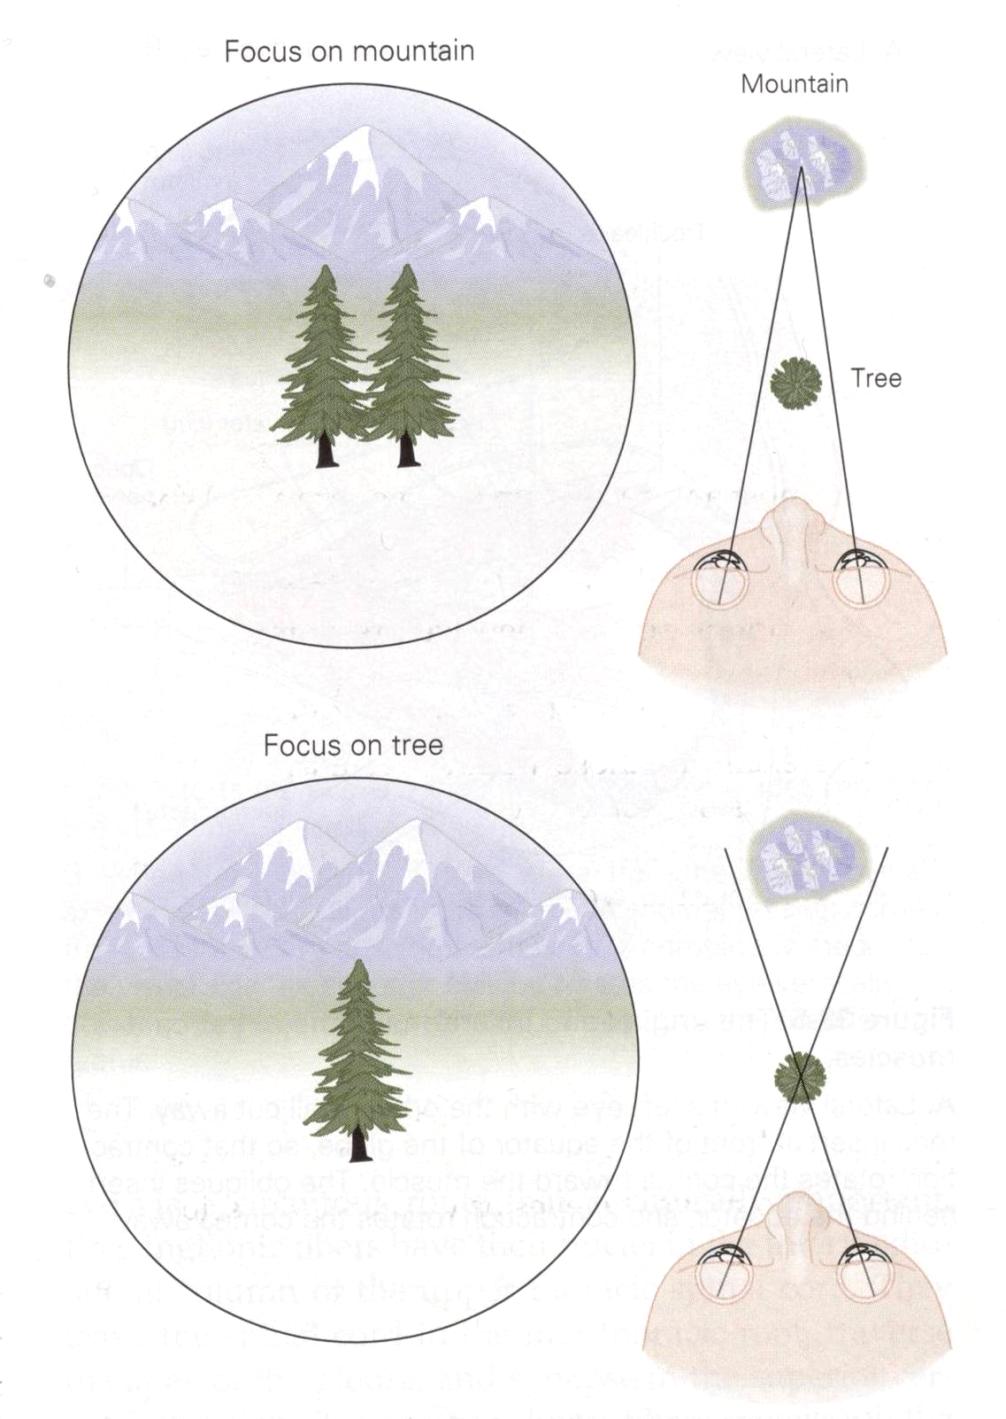 Vergens Focus på et fjell When the eyes focus on a distant mountain, the nearer tree occupies relatively different retinal positions in the two eyes and is seen as a double image.